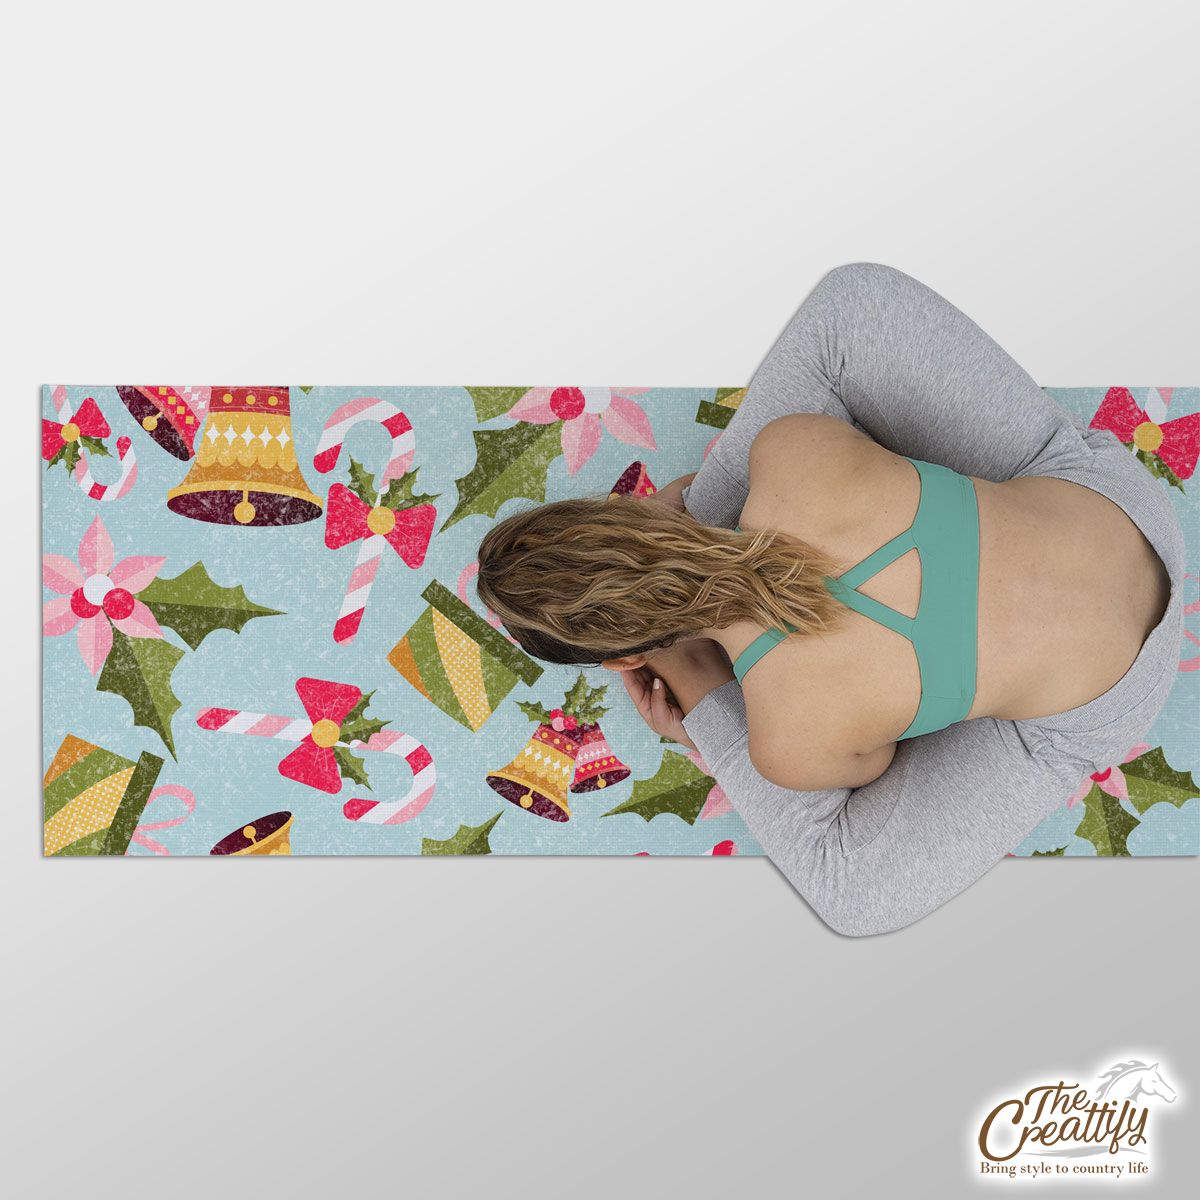 Bells, Christmas Bell And Candy Canes With Christmas Gifts Yoga Mat